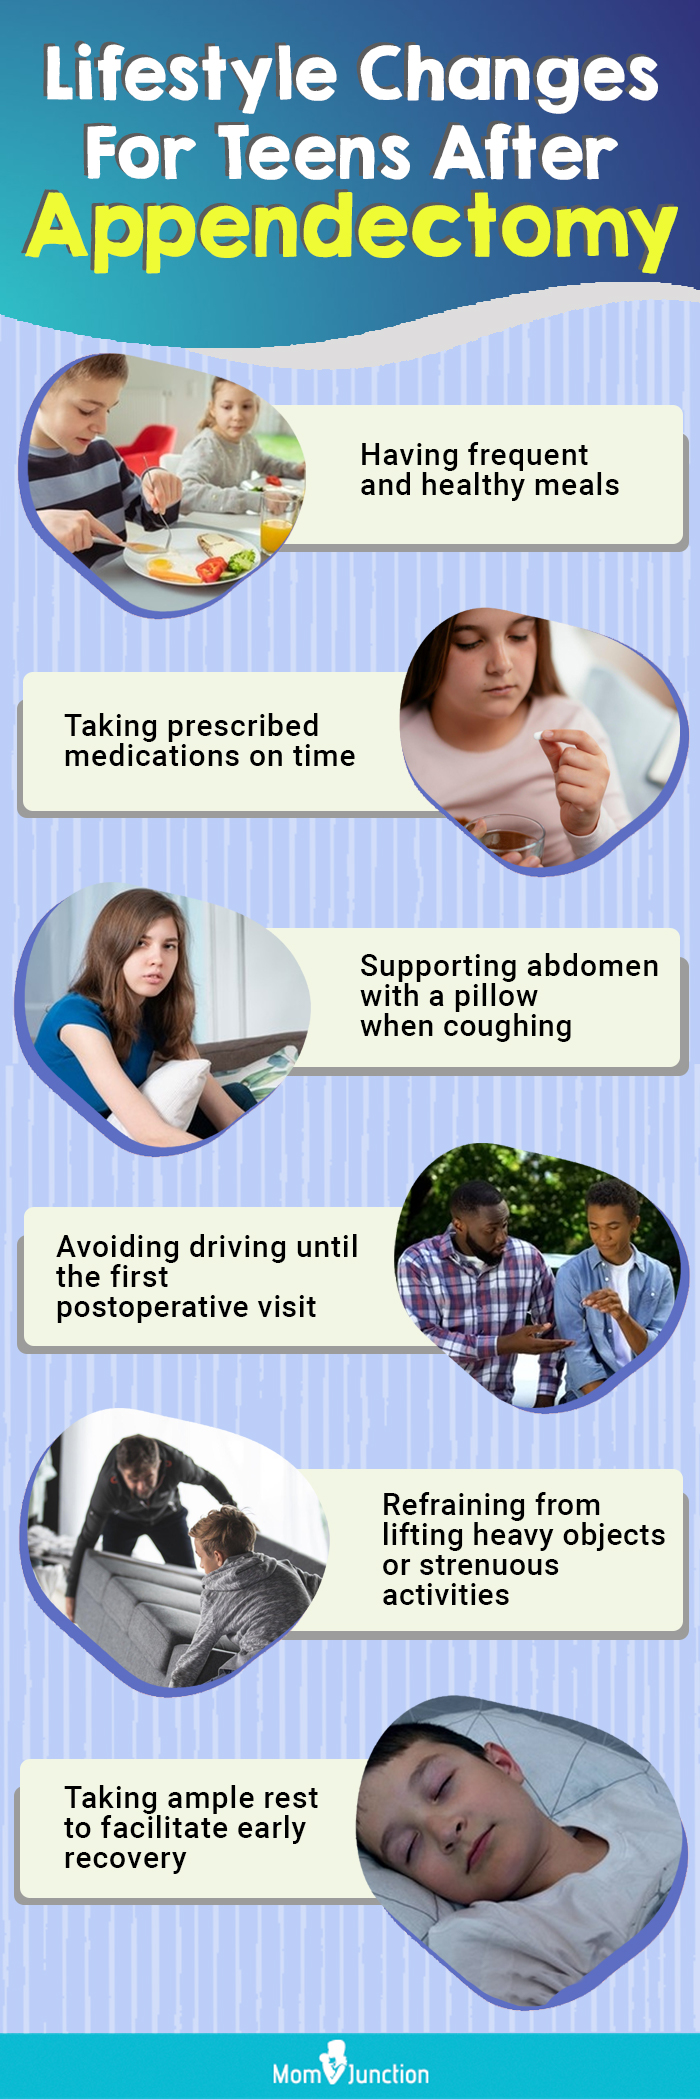 lifestyle changes for teens after appendectomy (infographic)